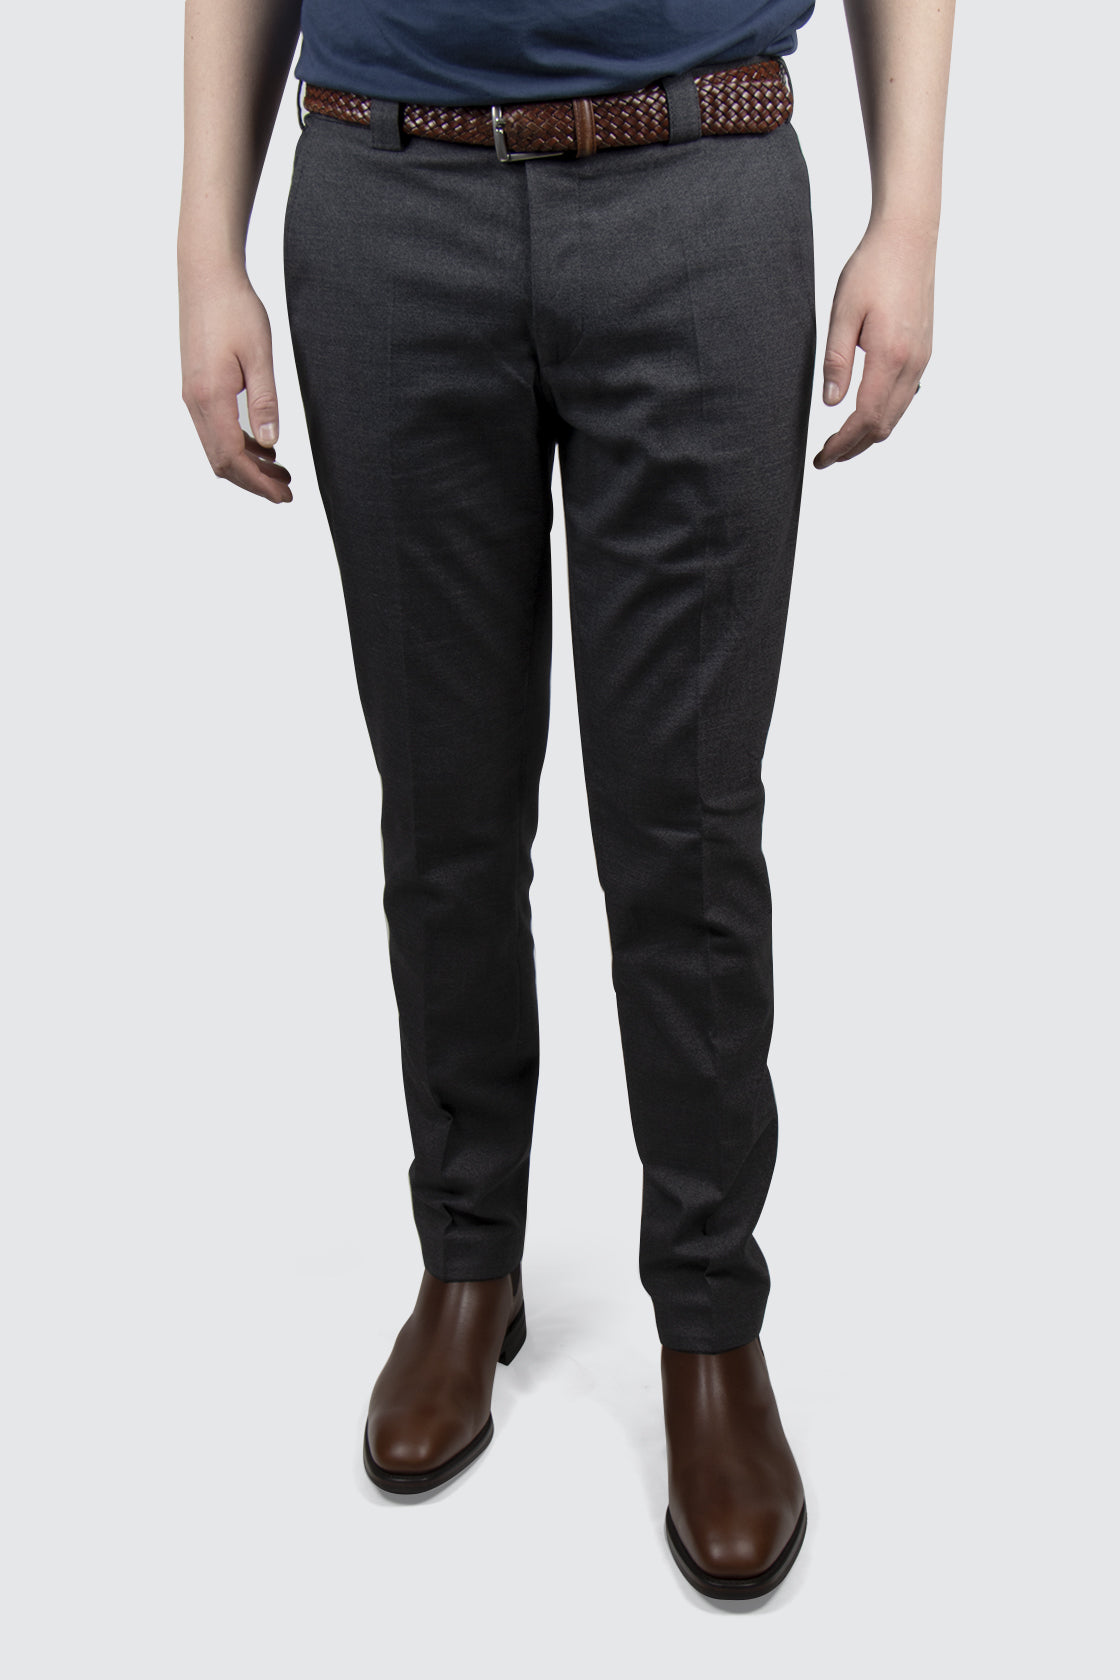 Meyer Tokyo Business Trouser Charcoal